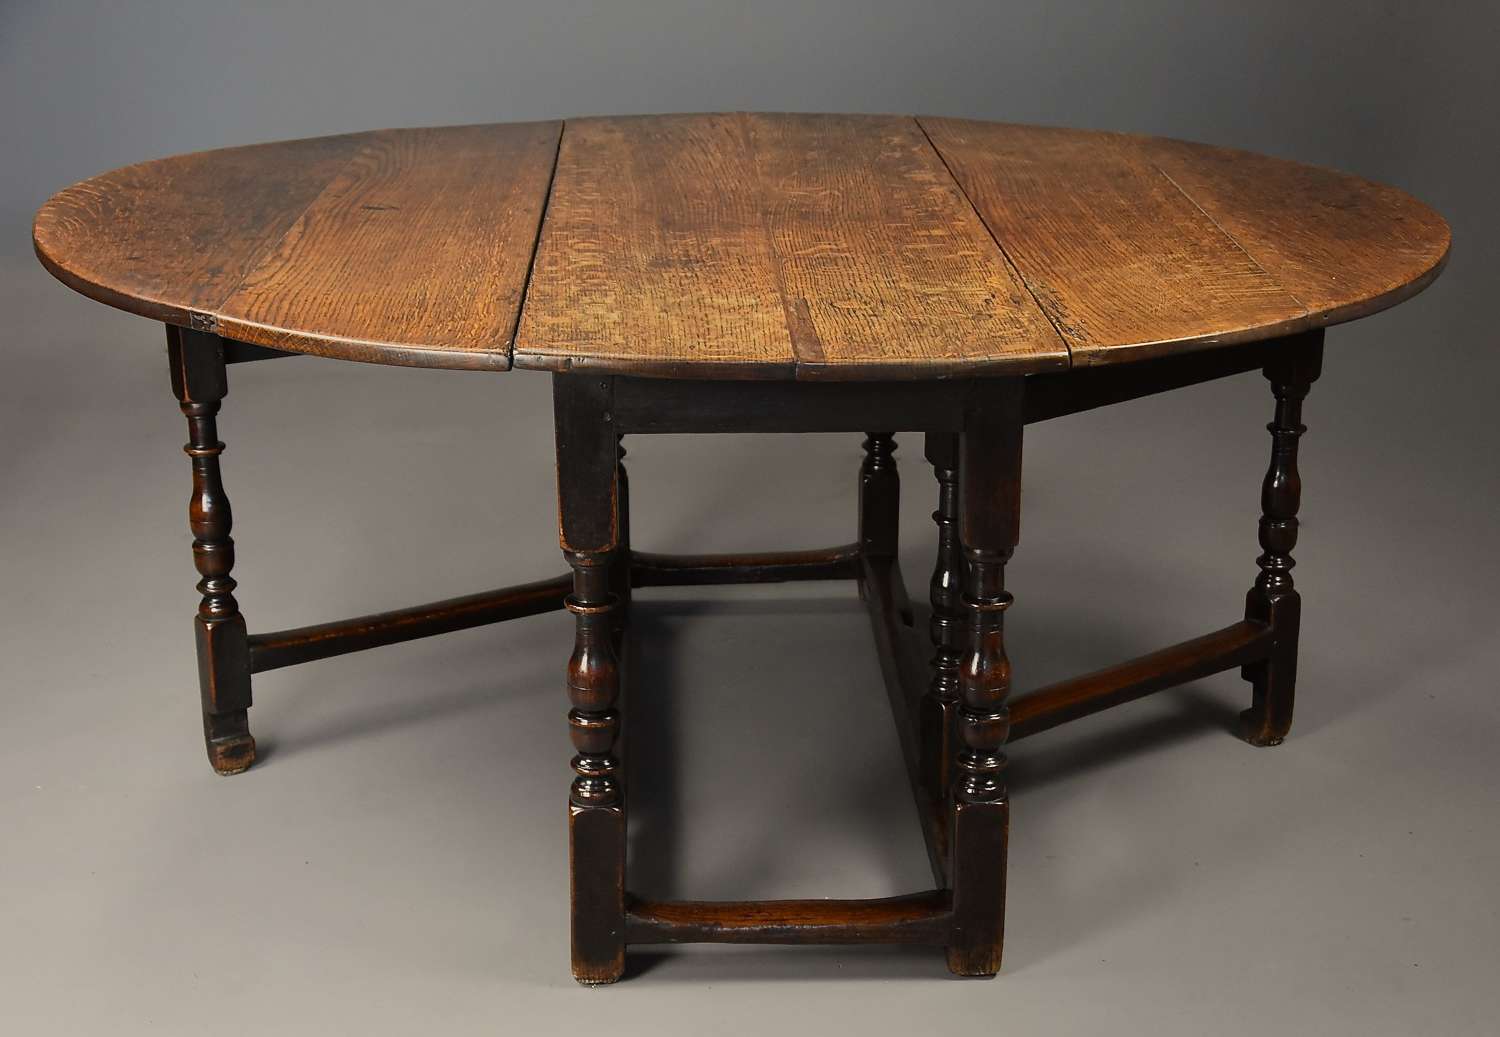 Large early 18th century oak gateleg table of exceptional patina